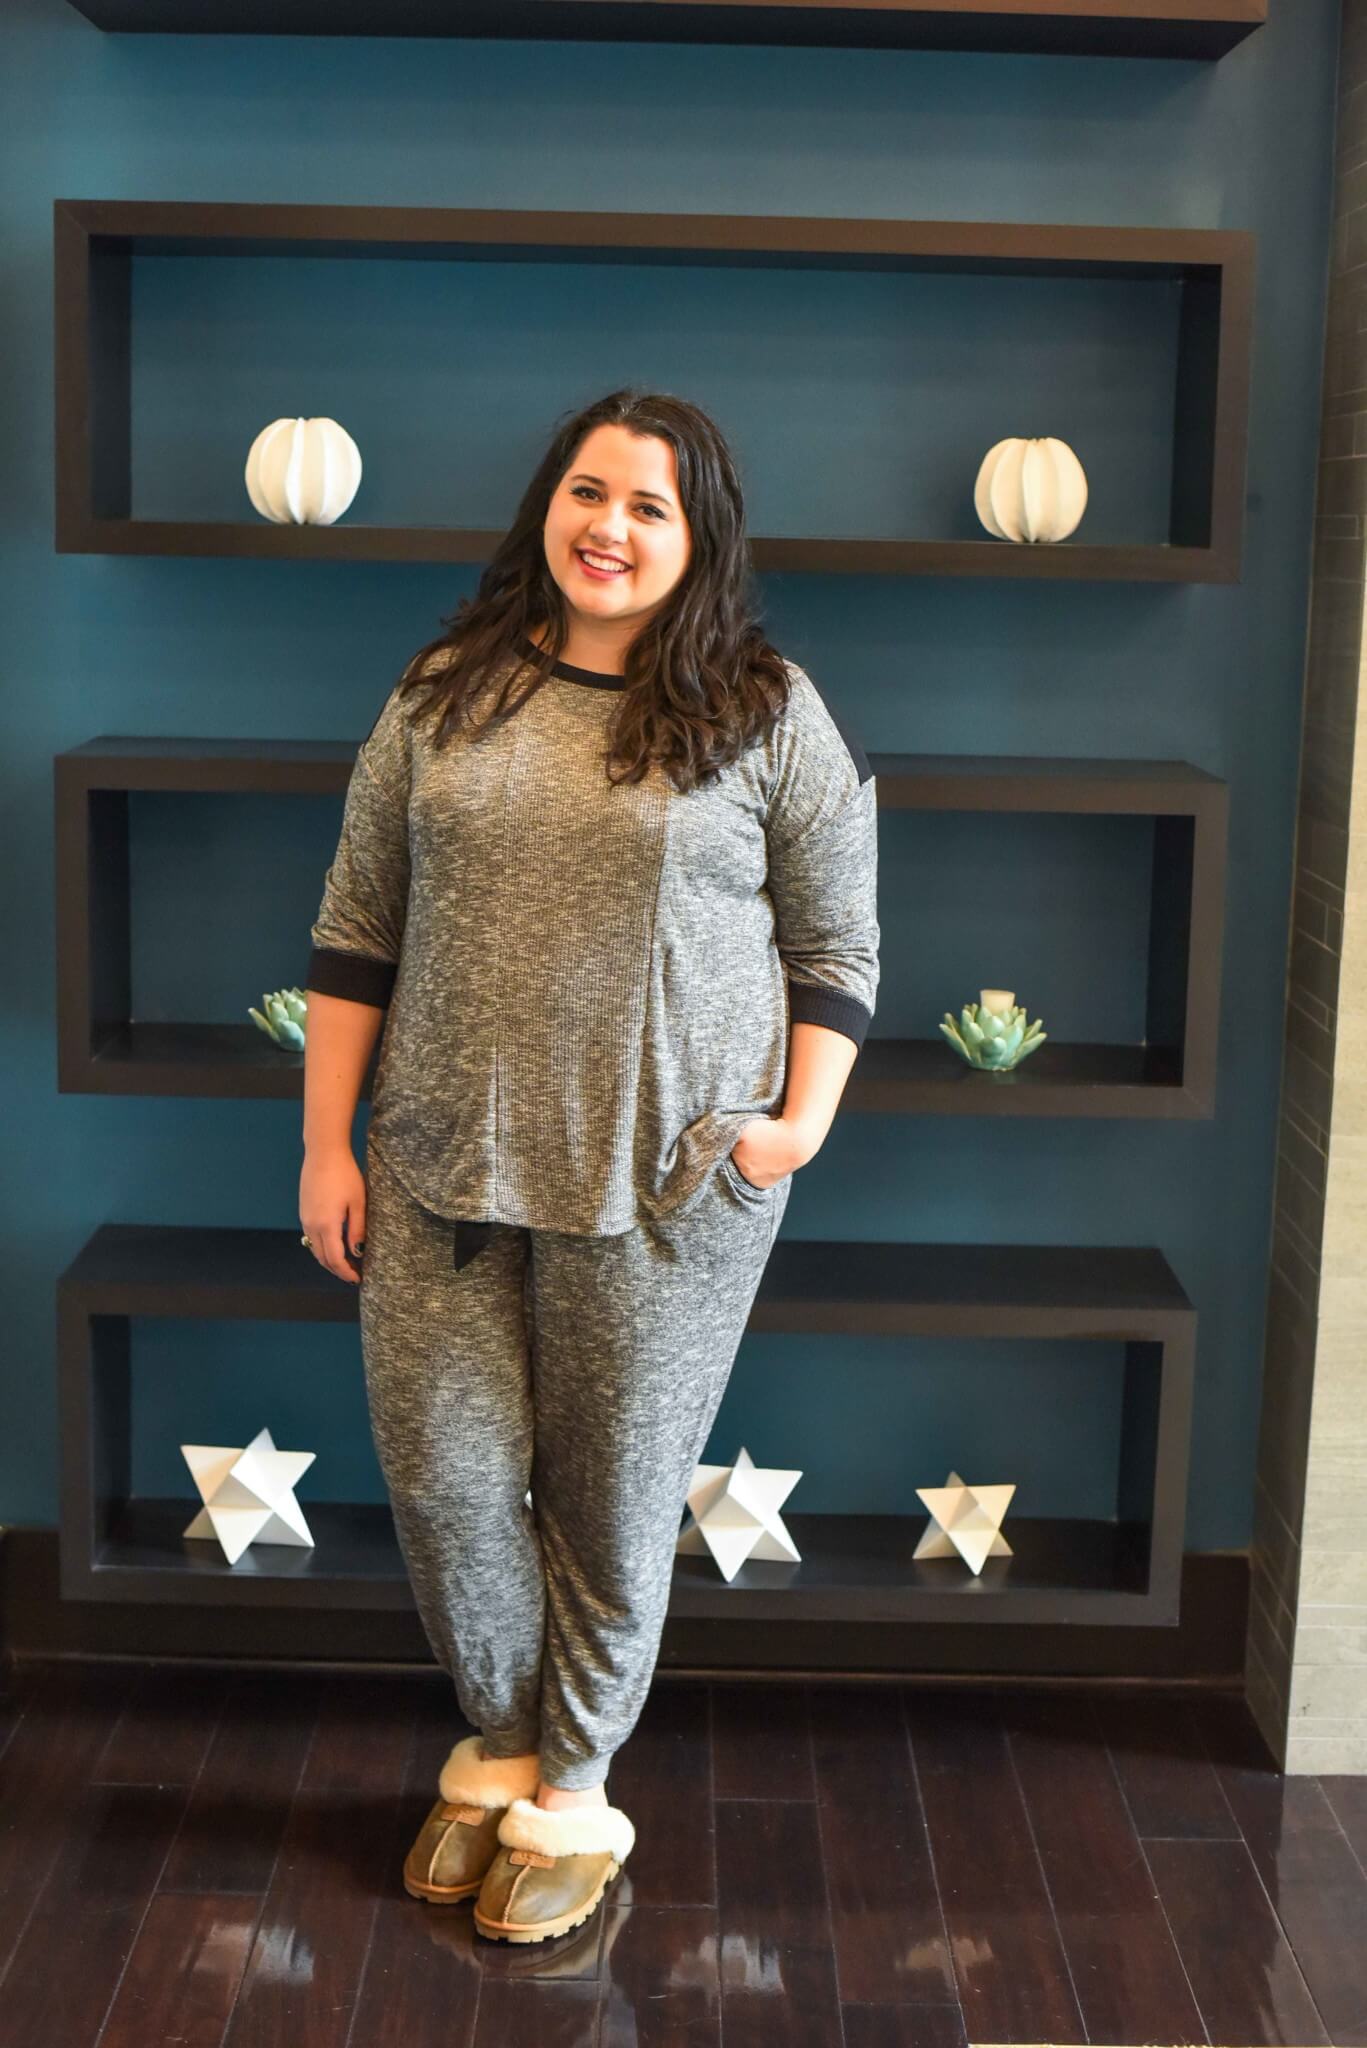 The Simply Vera Vera Wang pajamas from Kohl's have quickly become one of my go-to lounge and sleepwear sets. Not only is it comfortable, but it also won't break the bank. #plussizestyle #sleepwear - Getting a Better Night's Sleep with Kohl's Plus Size Pajamas by popular Houston fashion blogger Something Gold, Something Blue